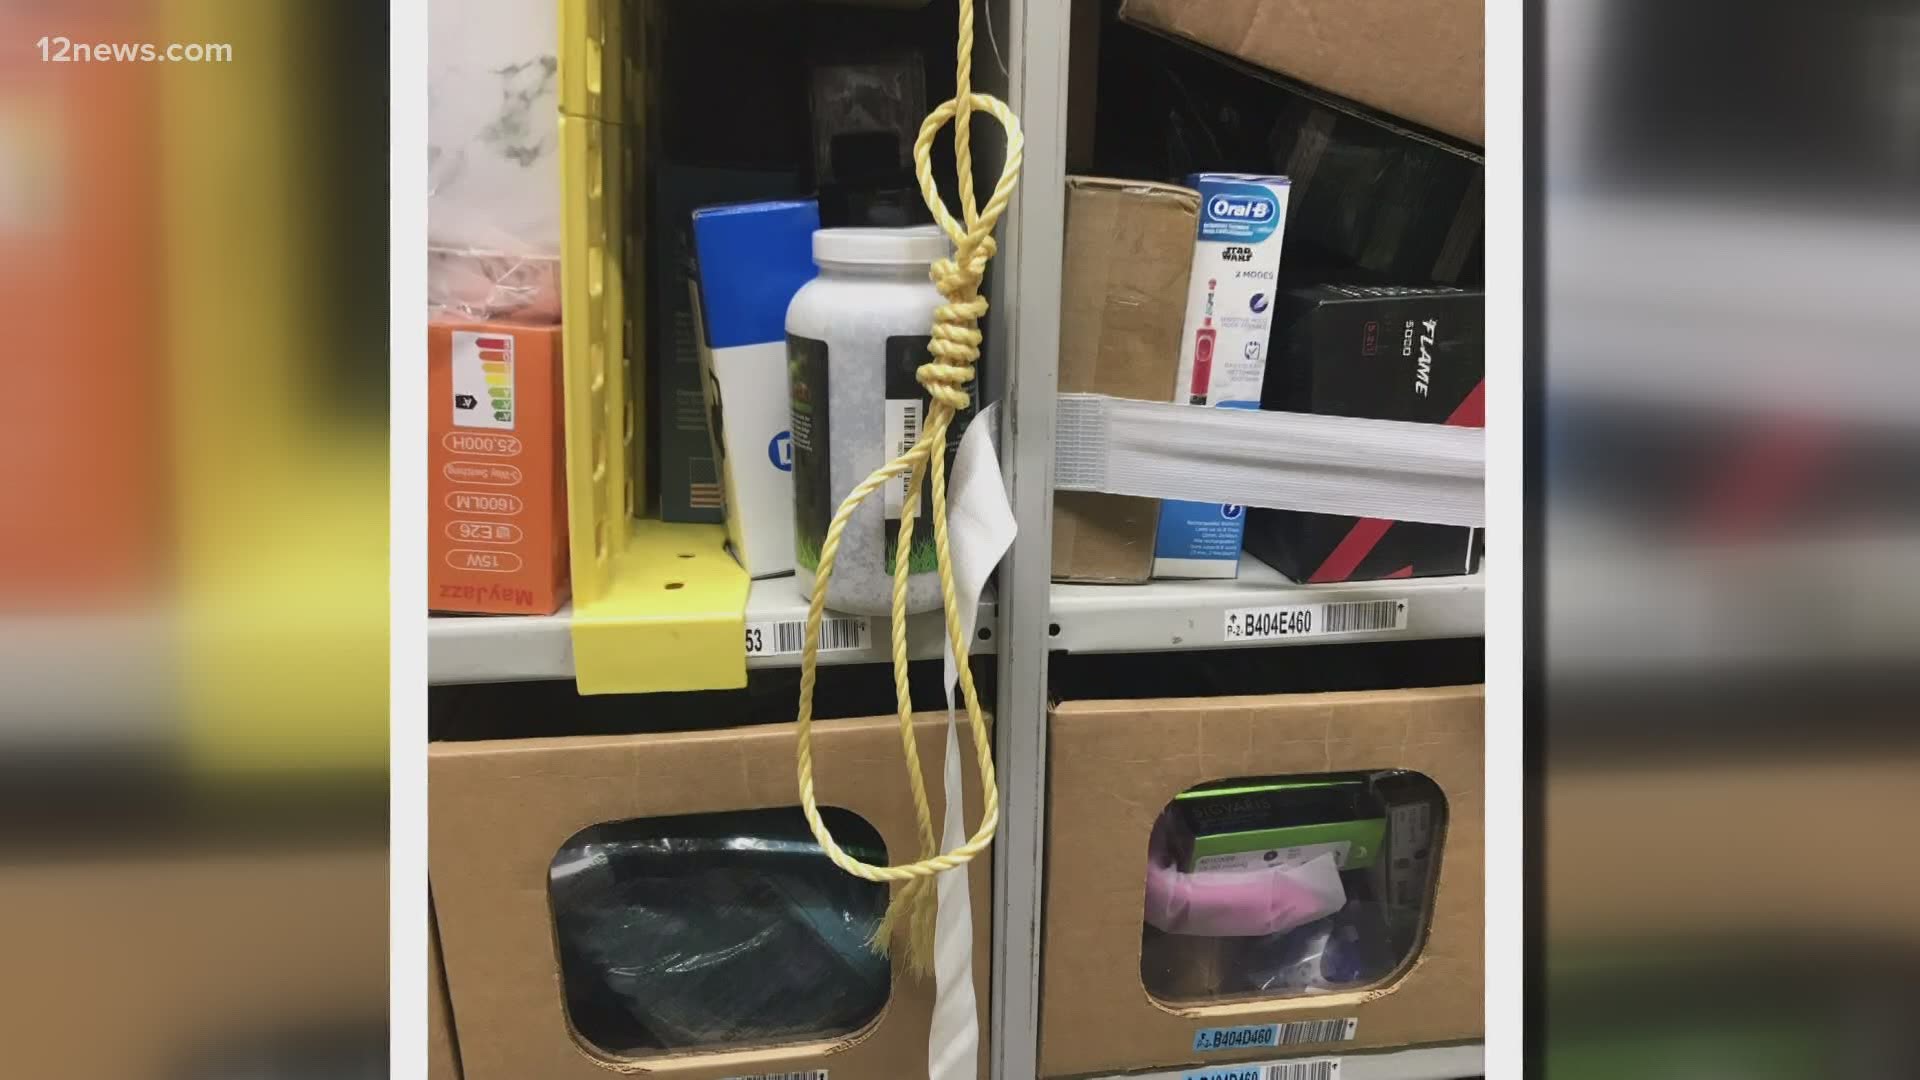 A Valley Amazon worker is calling for accountability and is afraid of what's next after finding a noose strung up for any employee to see.